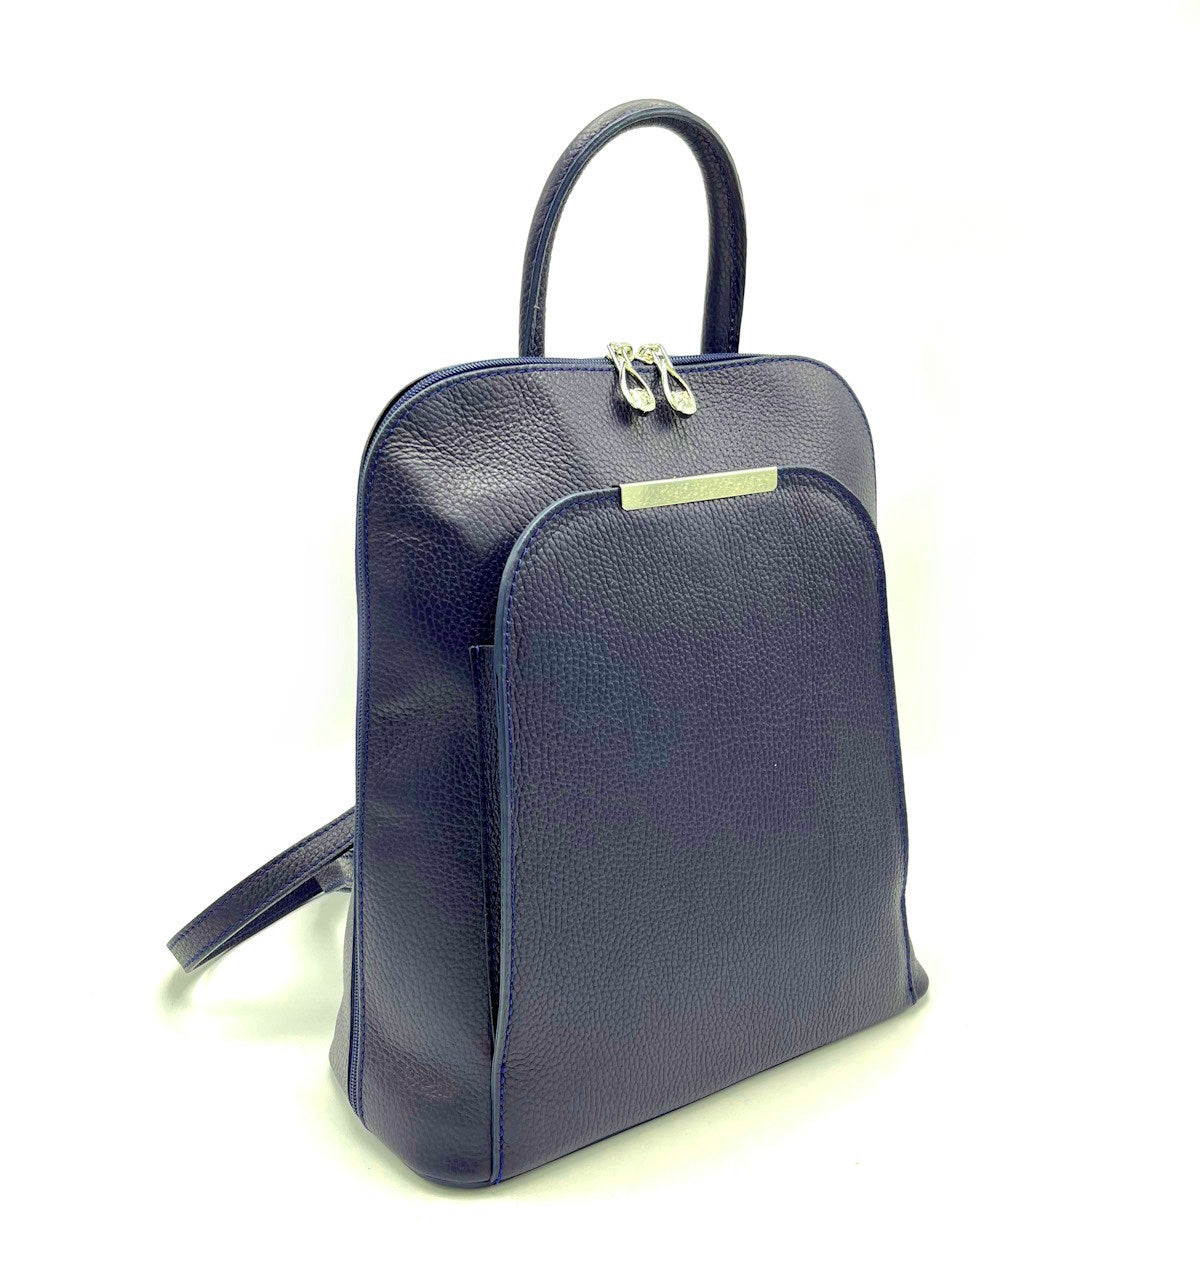 Genuine leather backpack, for women, made in Italy, art. 112427